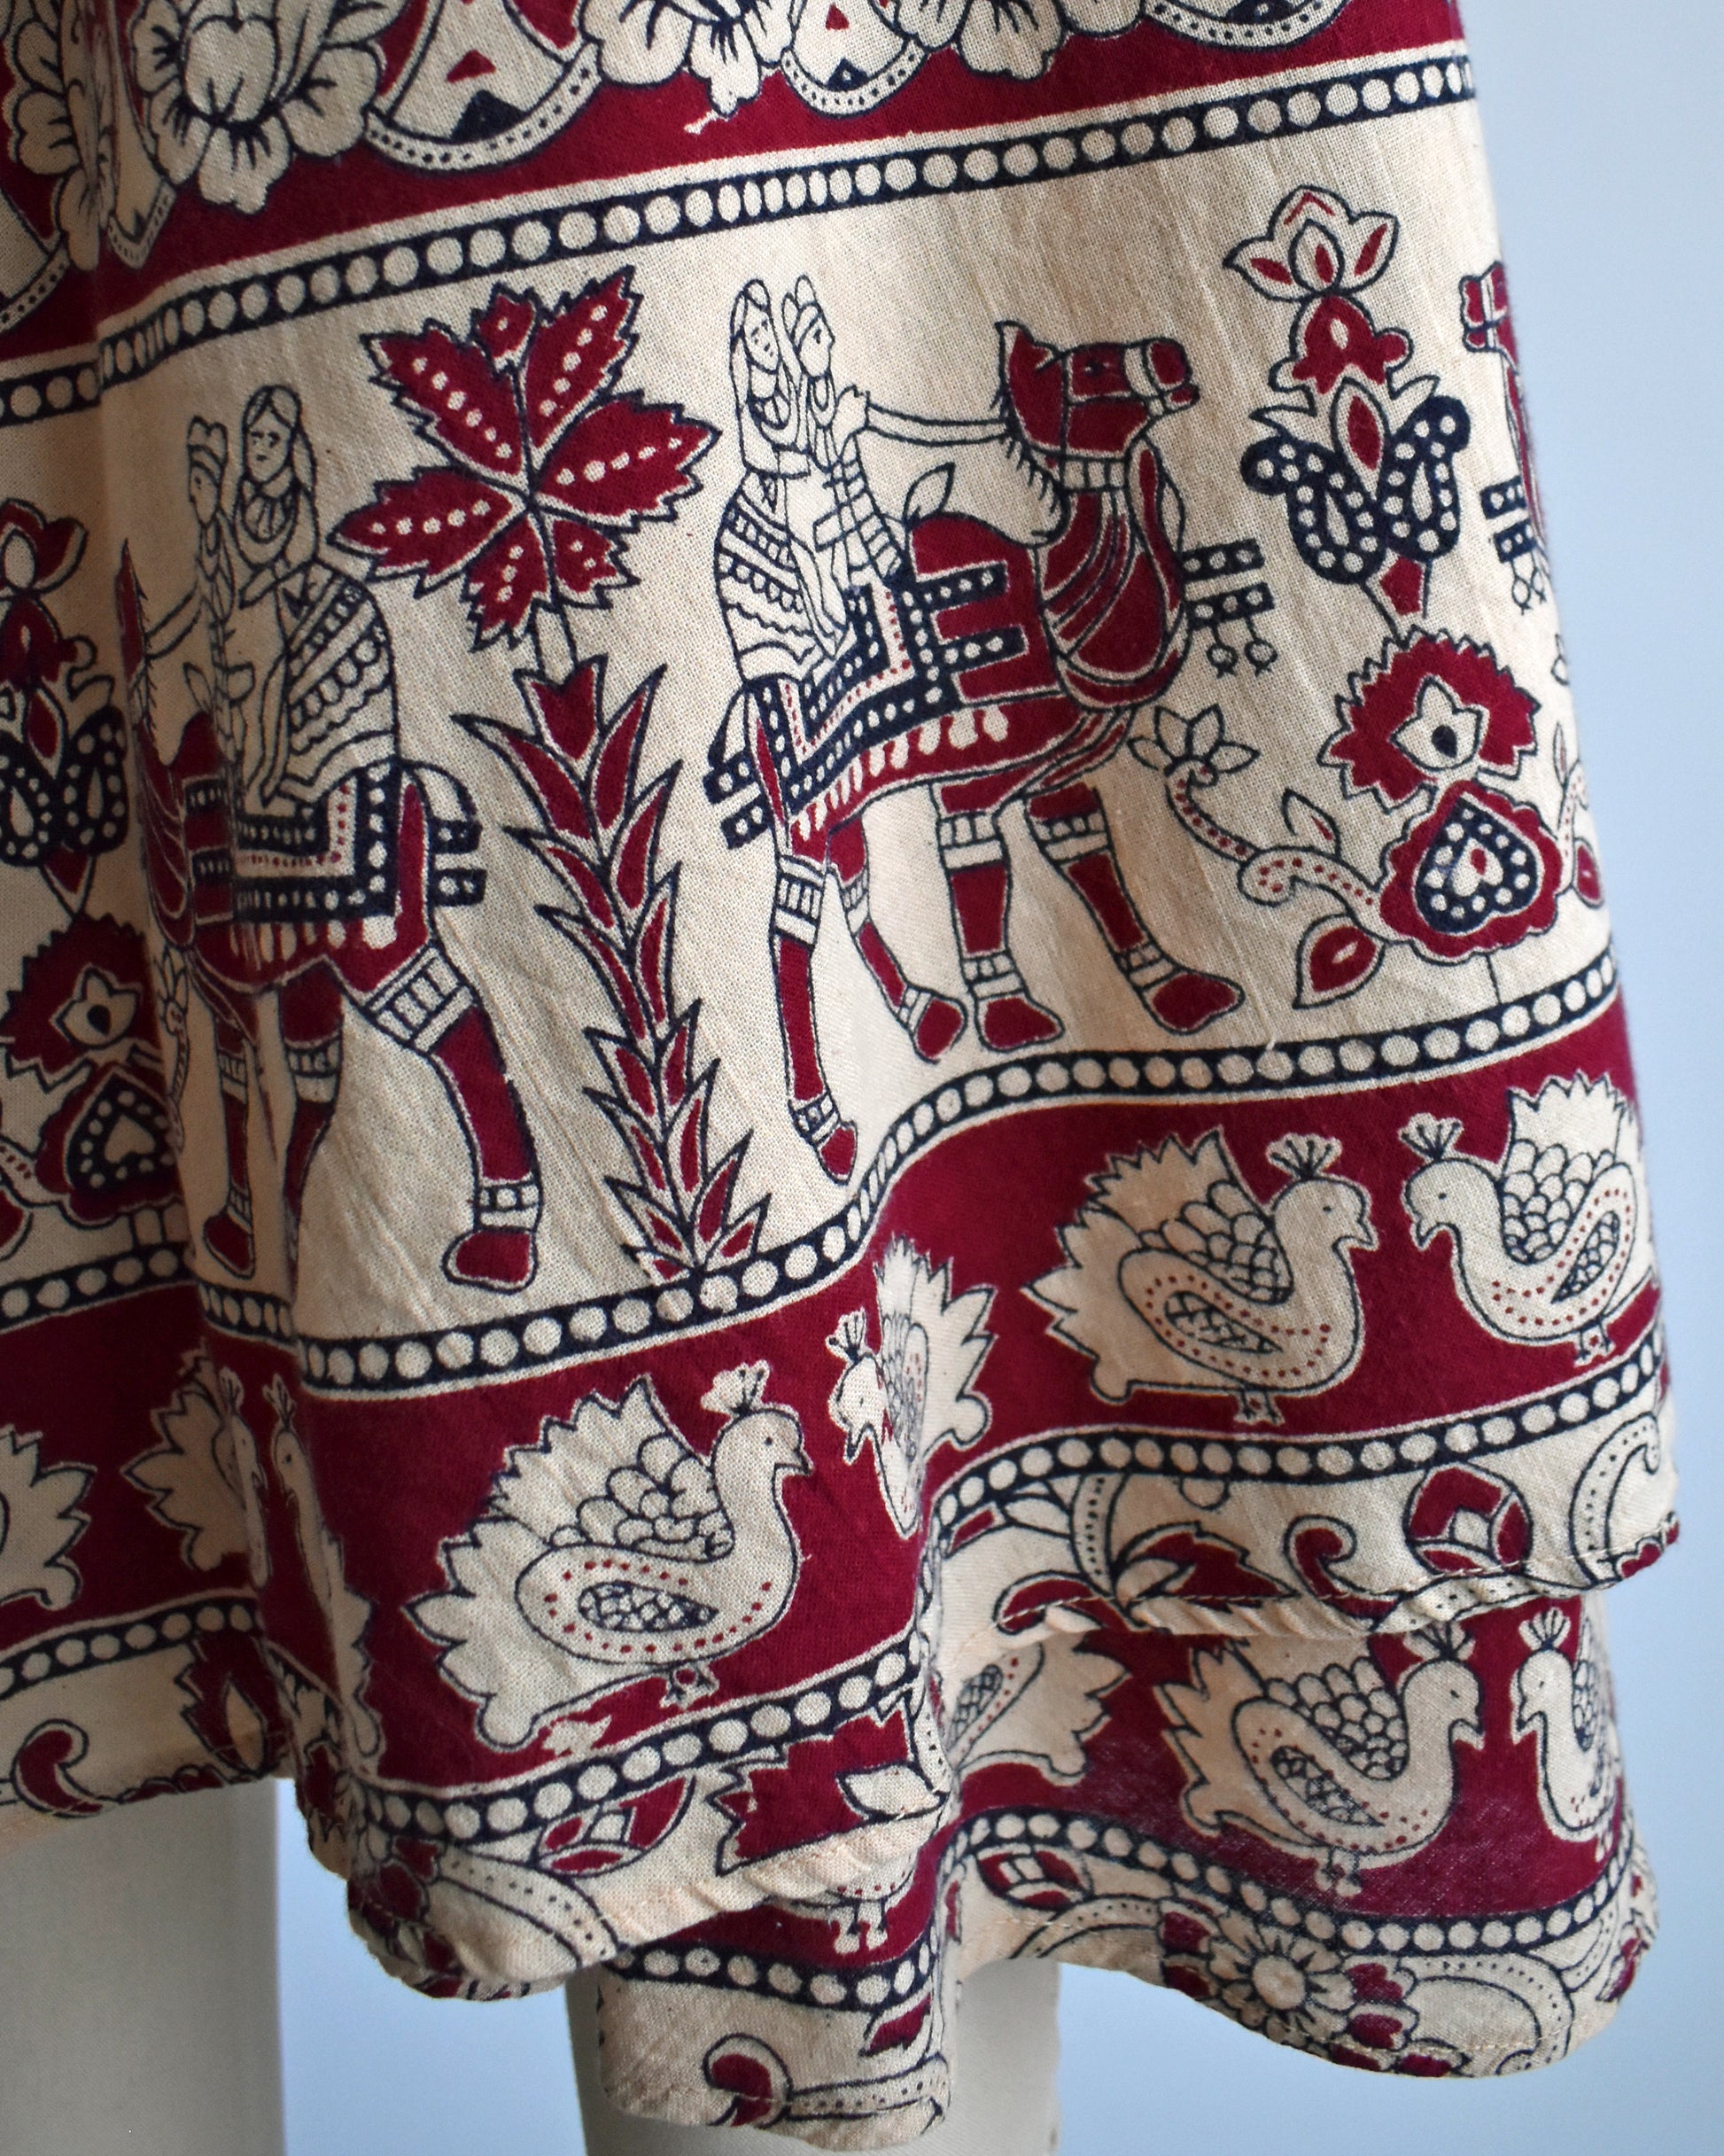 Close up of the camel riders and bird print near the hem